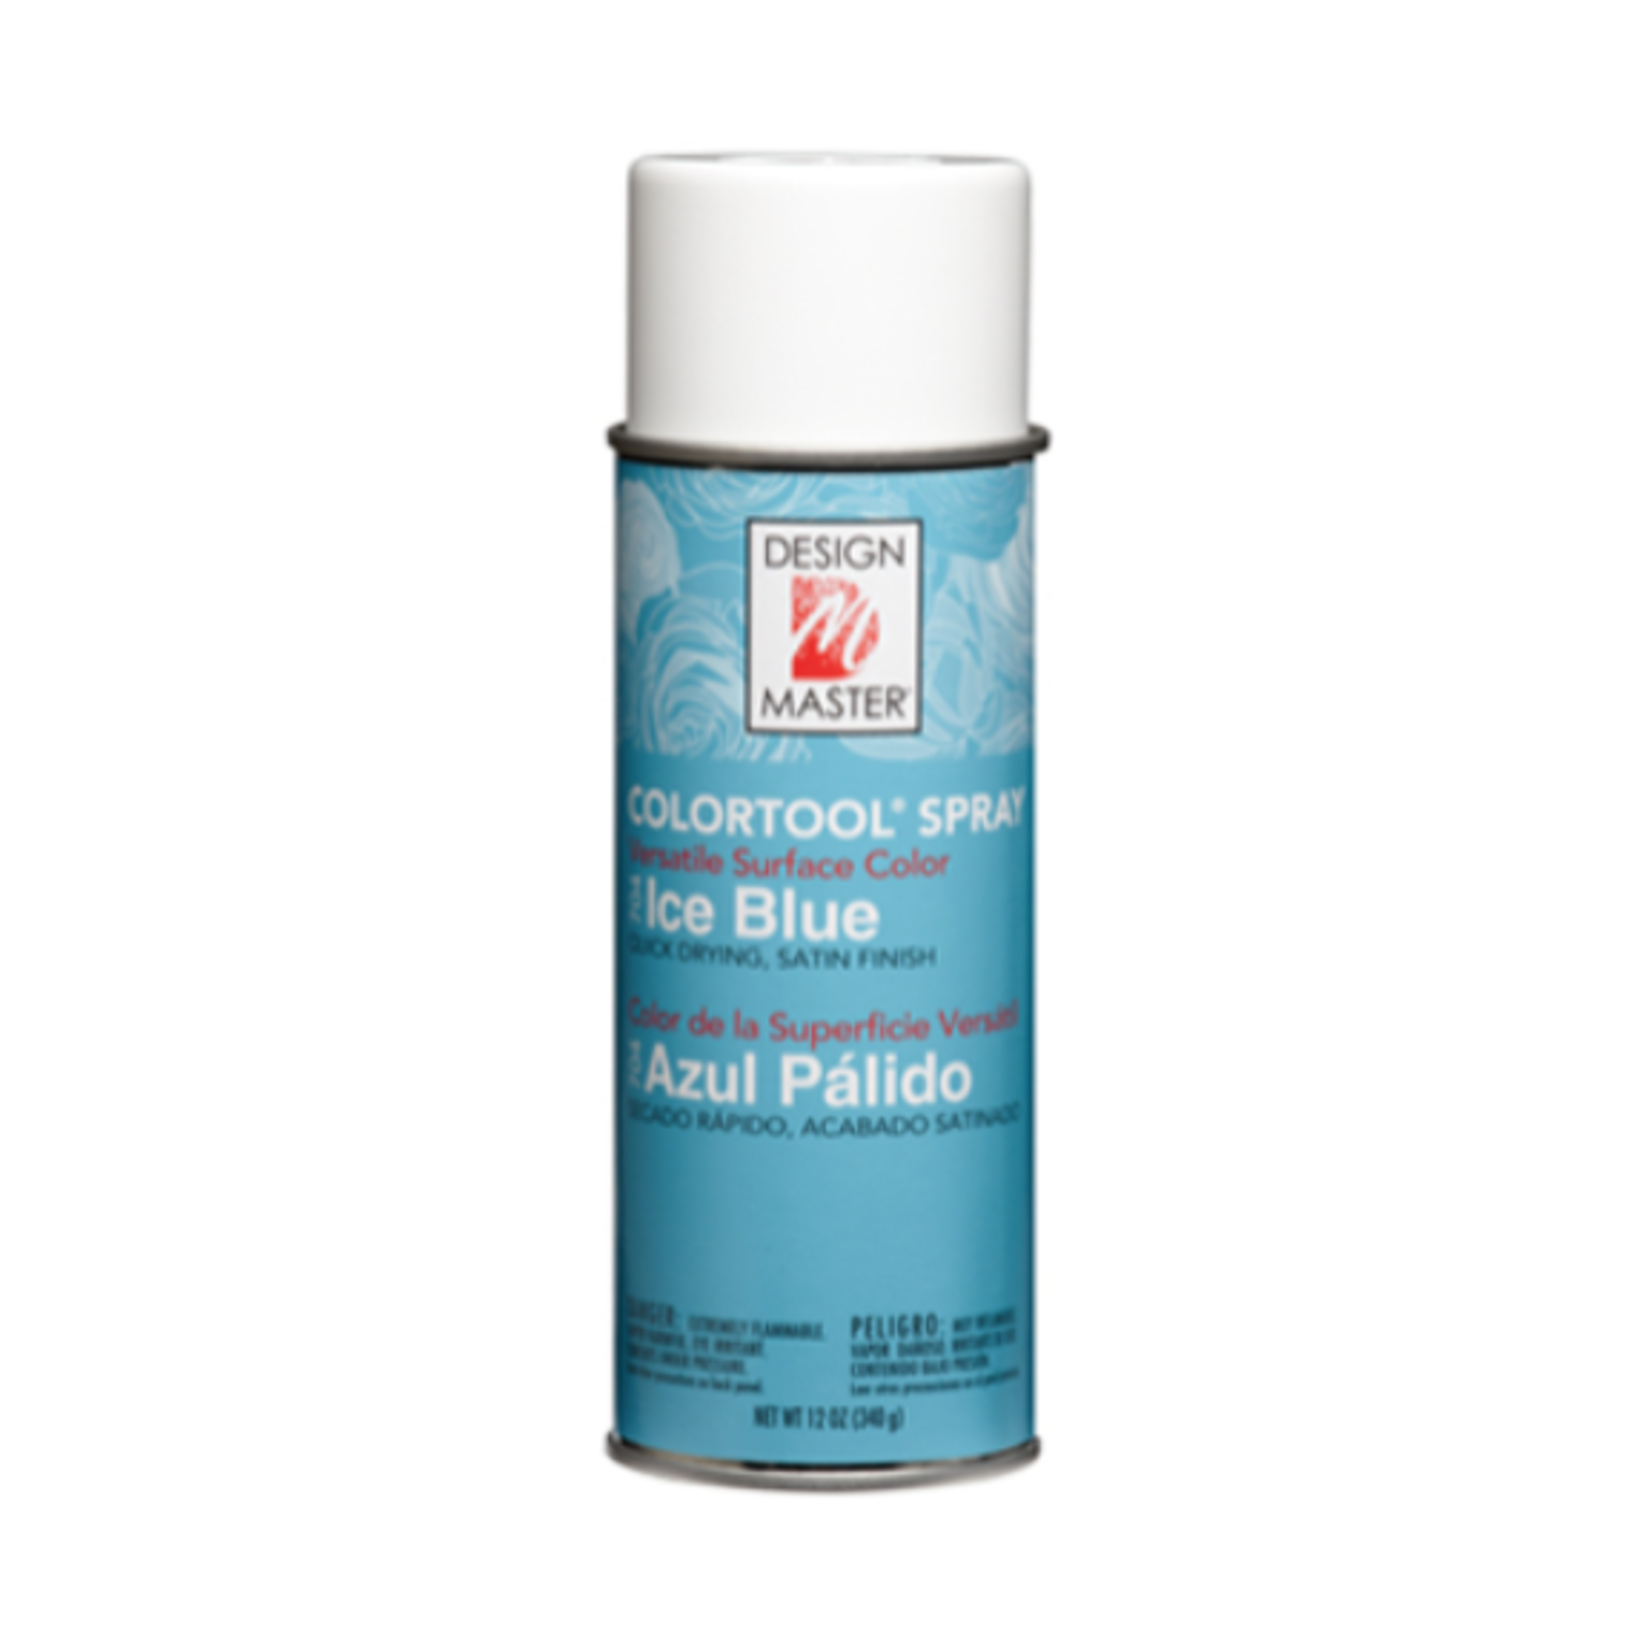 40% off was $14 now $8.39. 704 Colortool ice blue